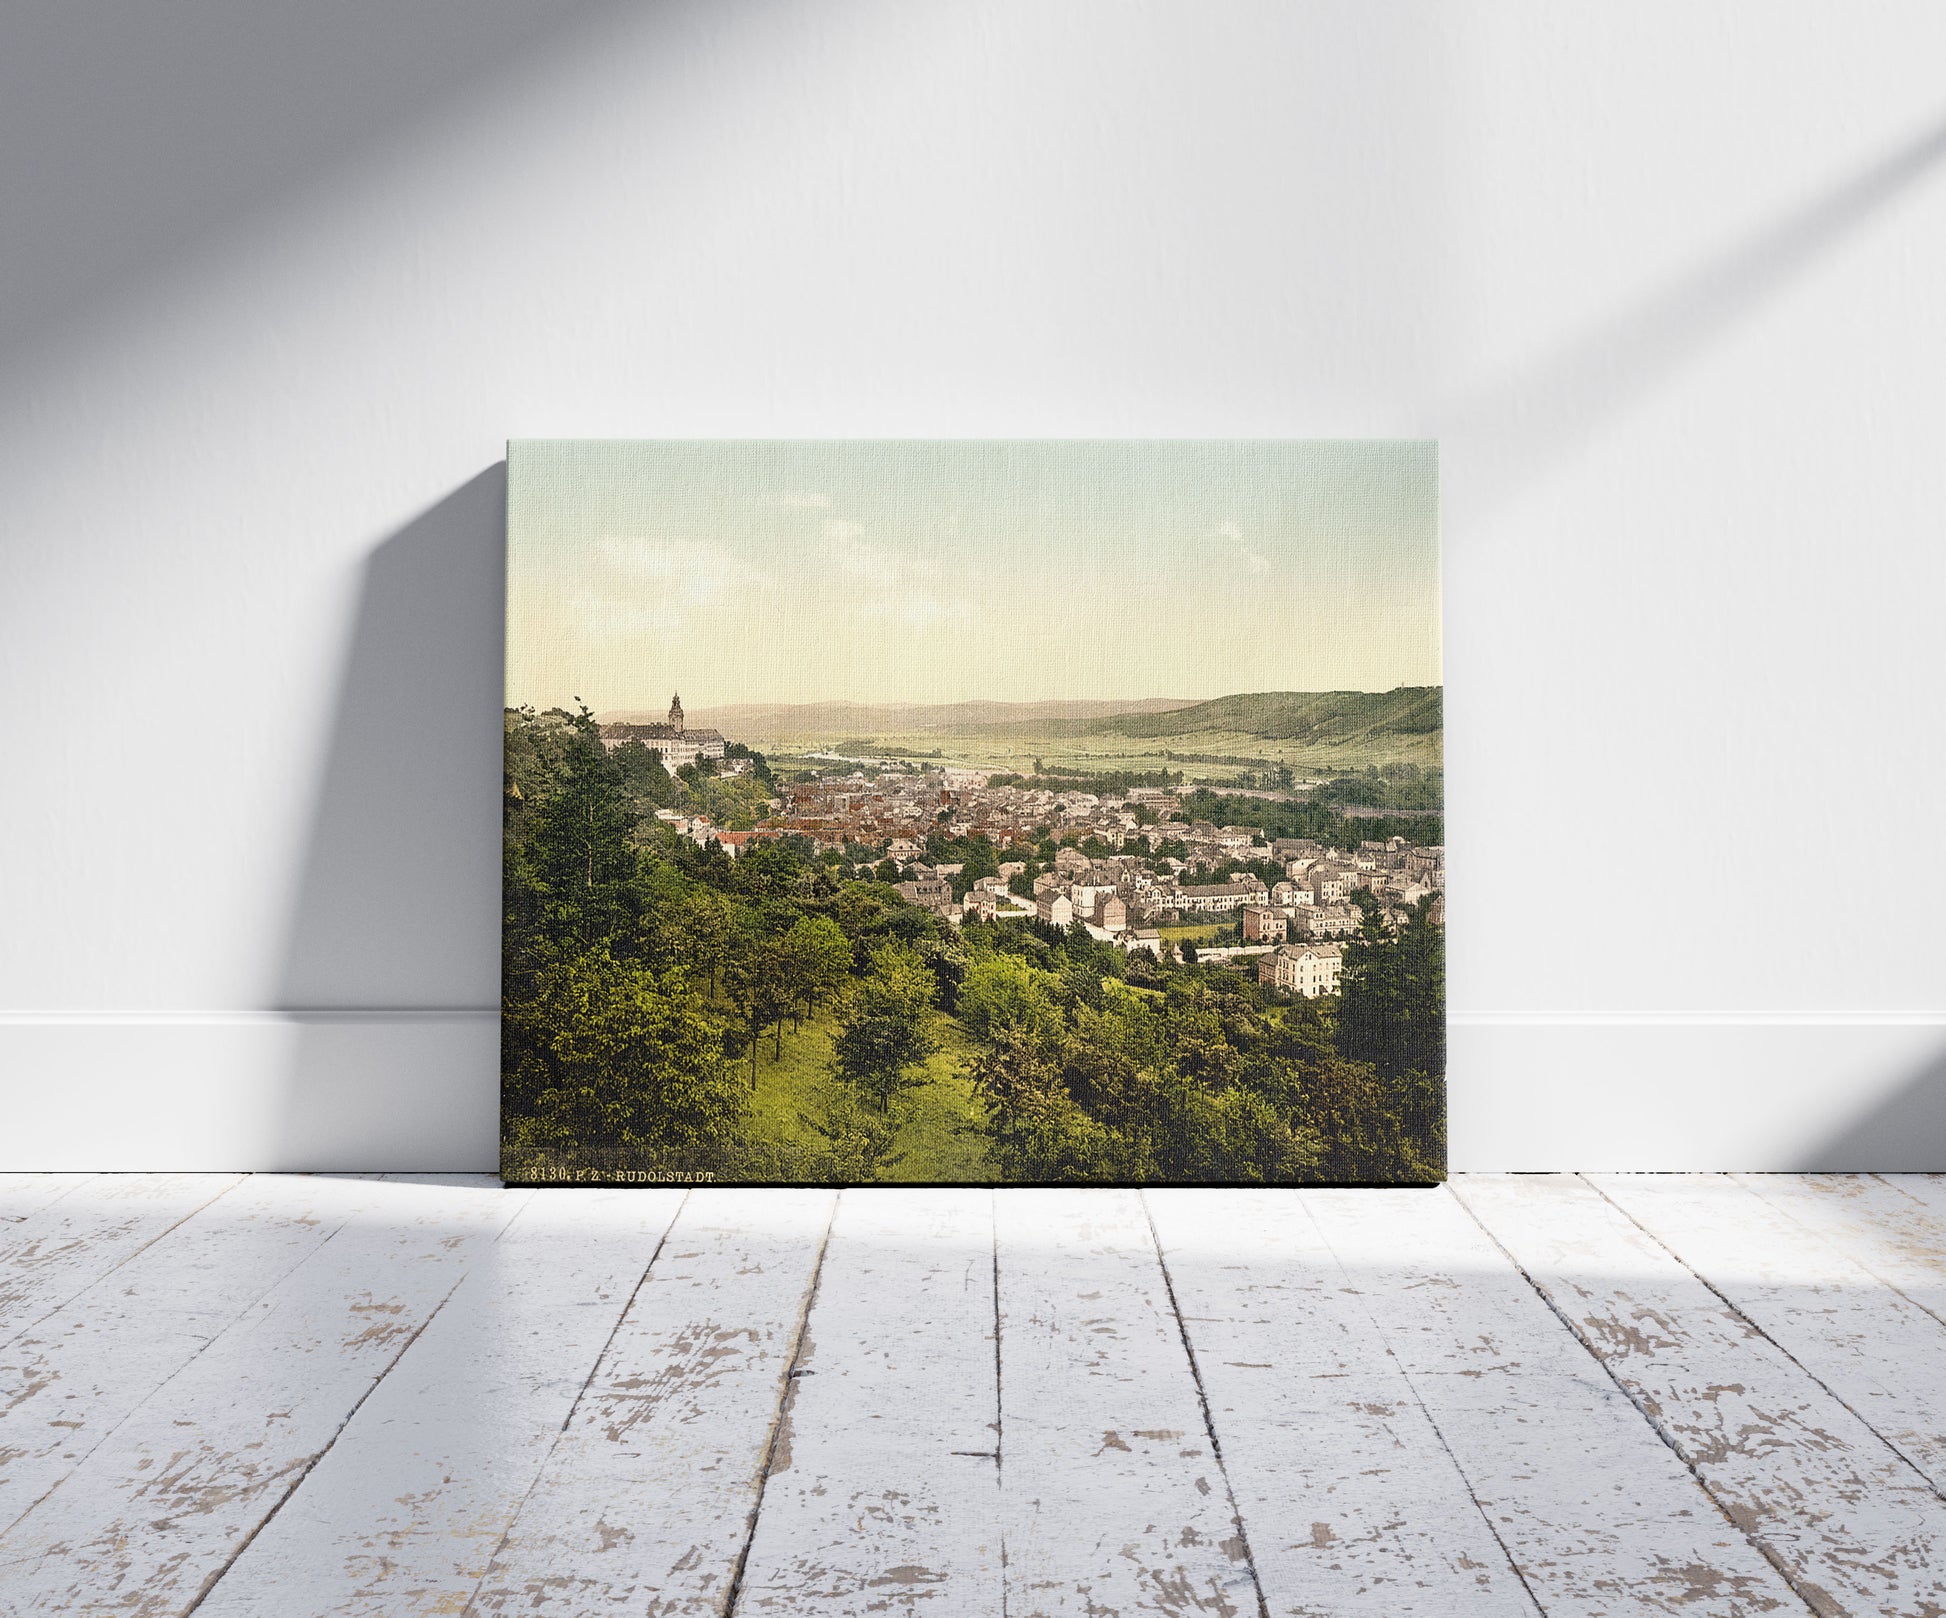 A picture of Rudolstadt, Thuringia, Germany